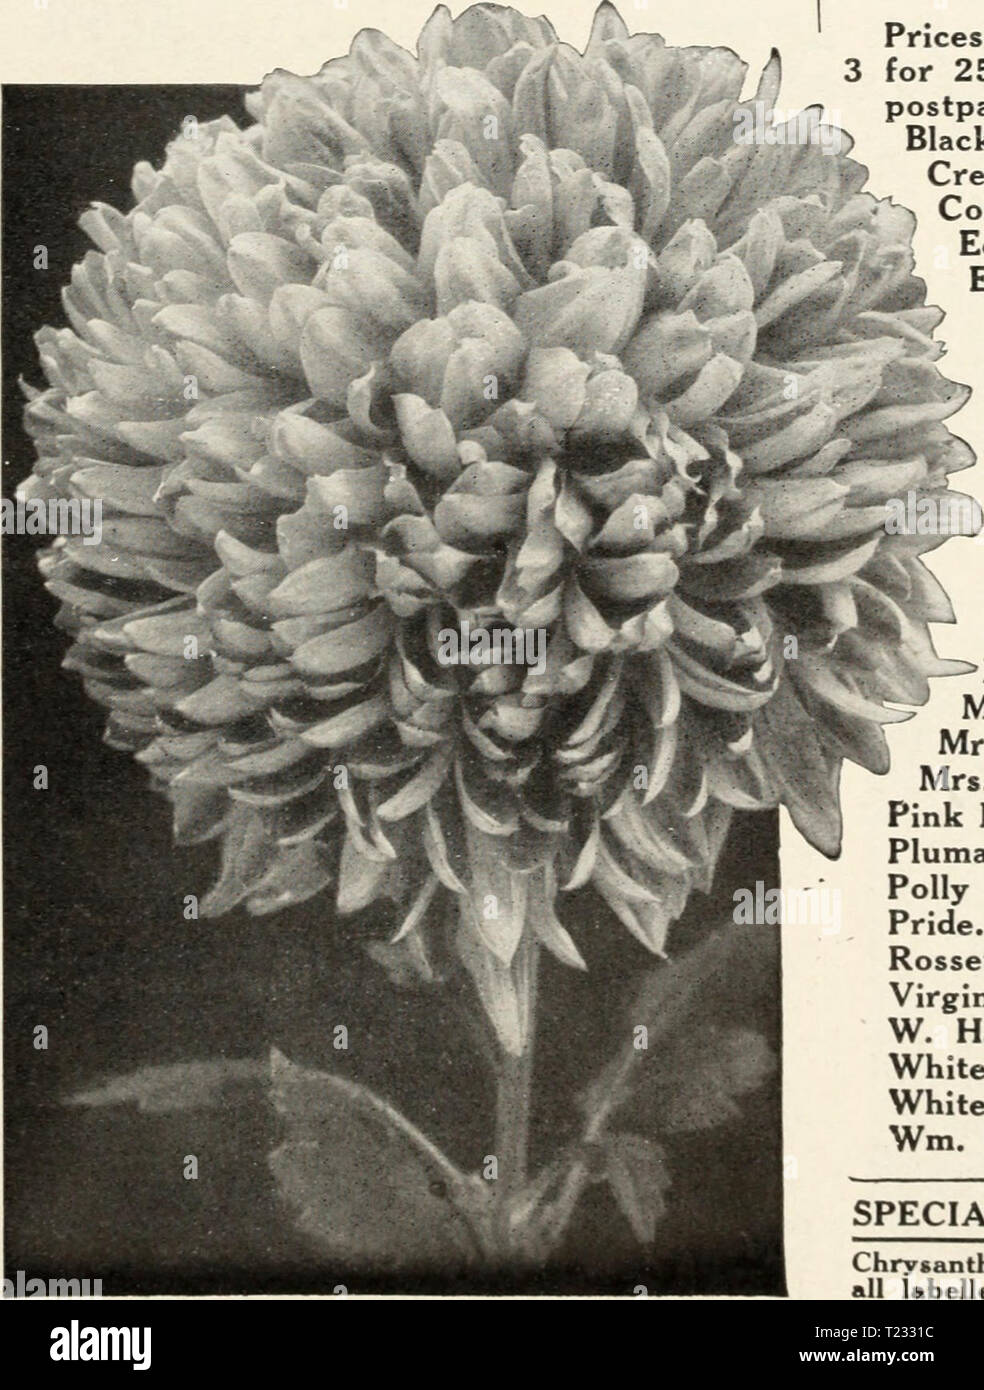 Archive image from page 86 of Dingee guide to rose culture Dingee guide to rose culture : 1850 1912  dingeeguidetoros19ding 3 Year: 1912  l®SDinjee&Conard Go.,West QrovePiM i:ri* Dingee Chrysanthemums New Varieties The culture of Chrysanthemums is the easiest. If grown in the house, first put them into pots 3 to 4 inches in diameter, re-planting them as they make growth into larger pots or boxes, 6 and 7 inches in diameter. Use good, rich soil and water frequently and thor- oughly. If grown in the open ground, they should be planted in a sheltered situation to protect them from early frosts.  Stock Photo